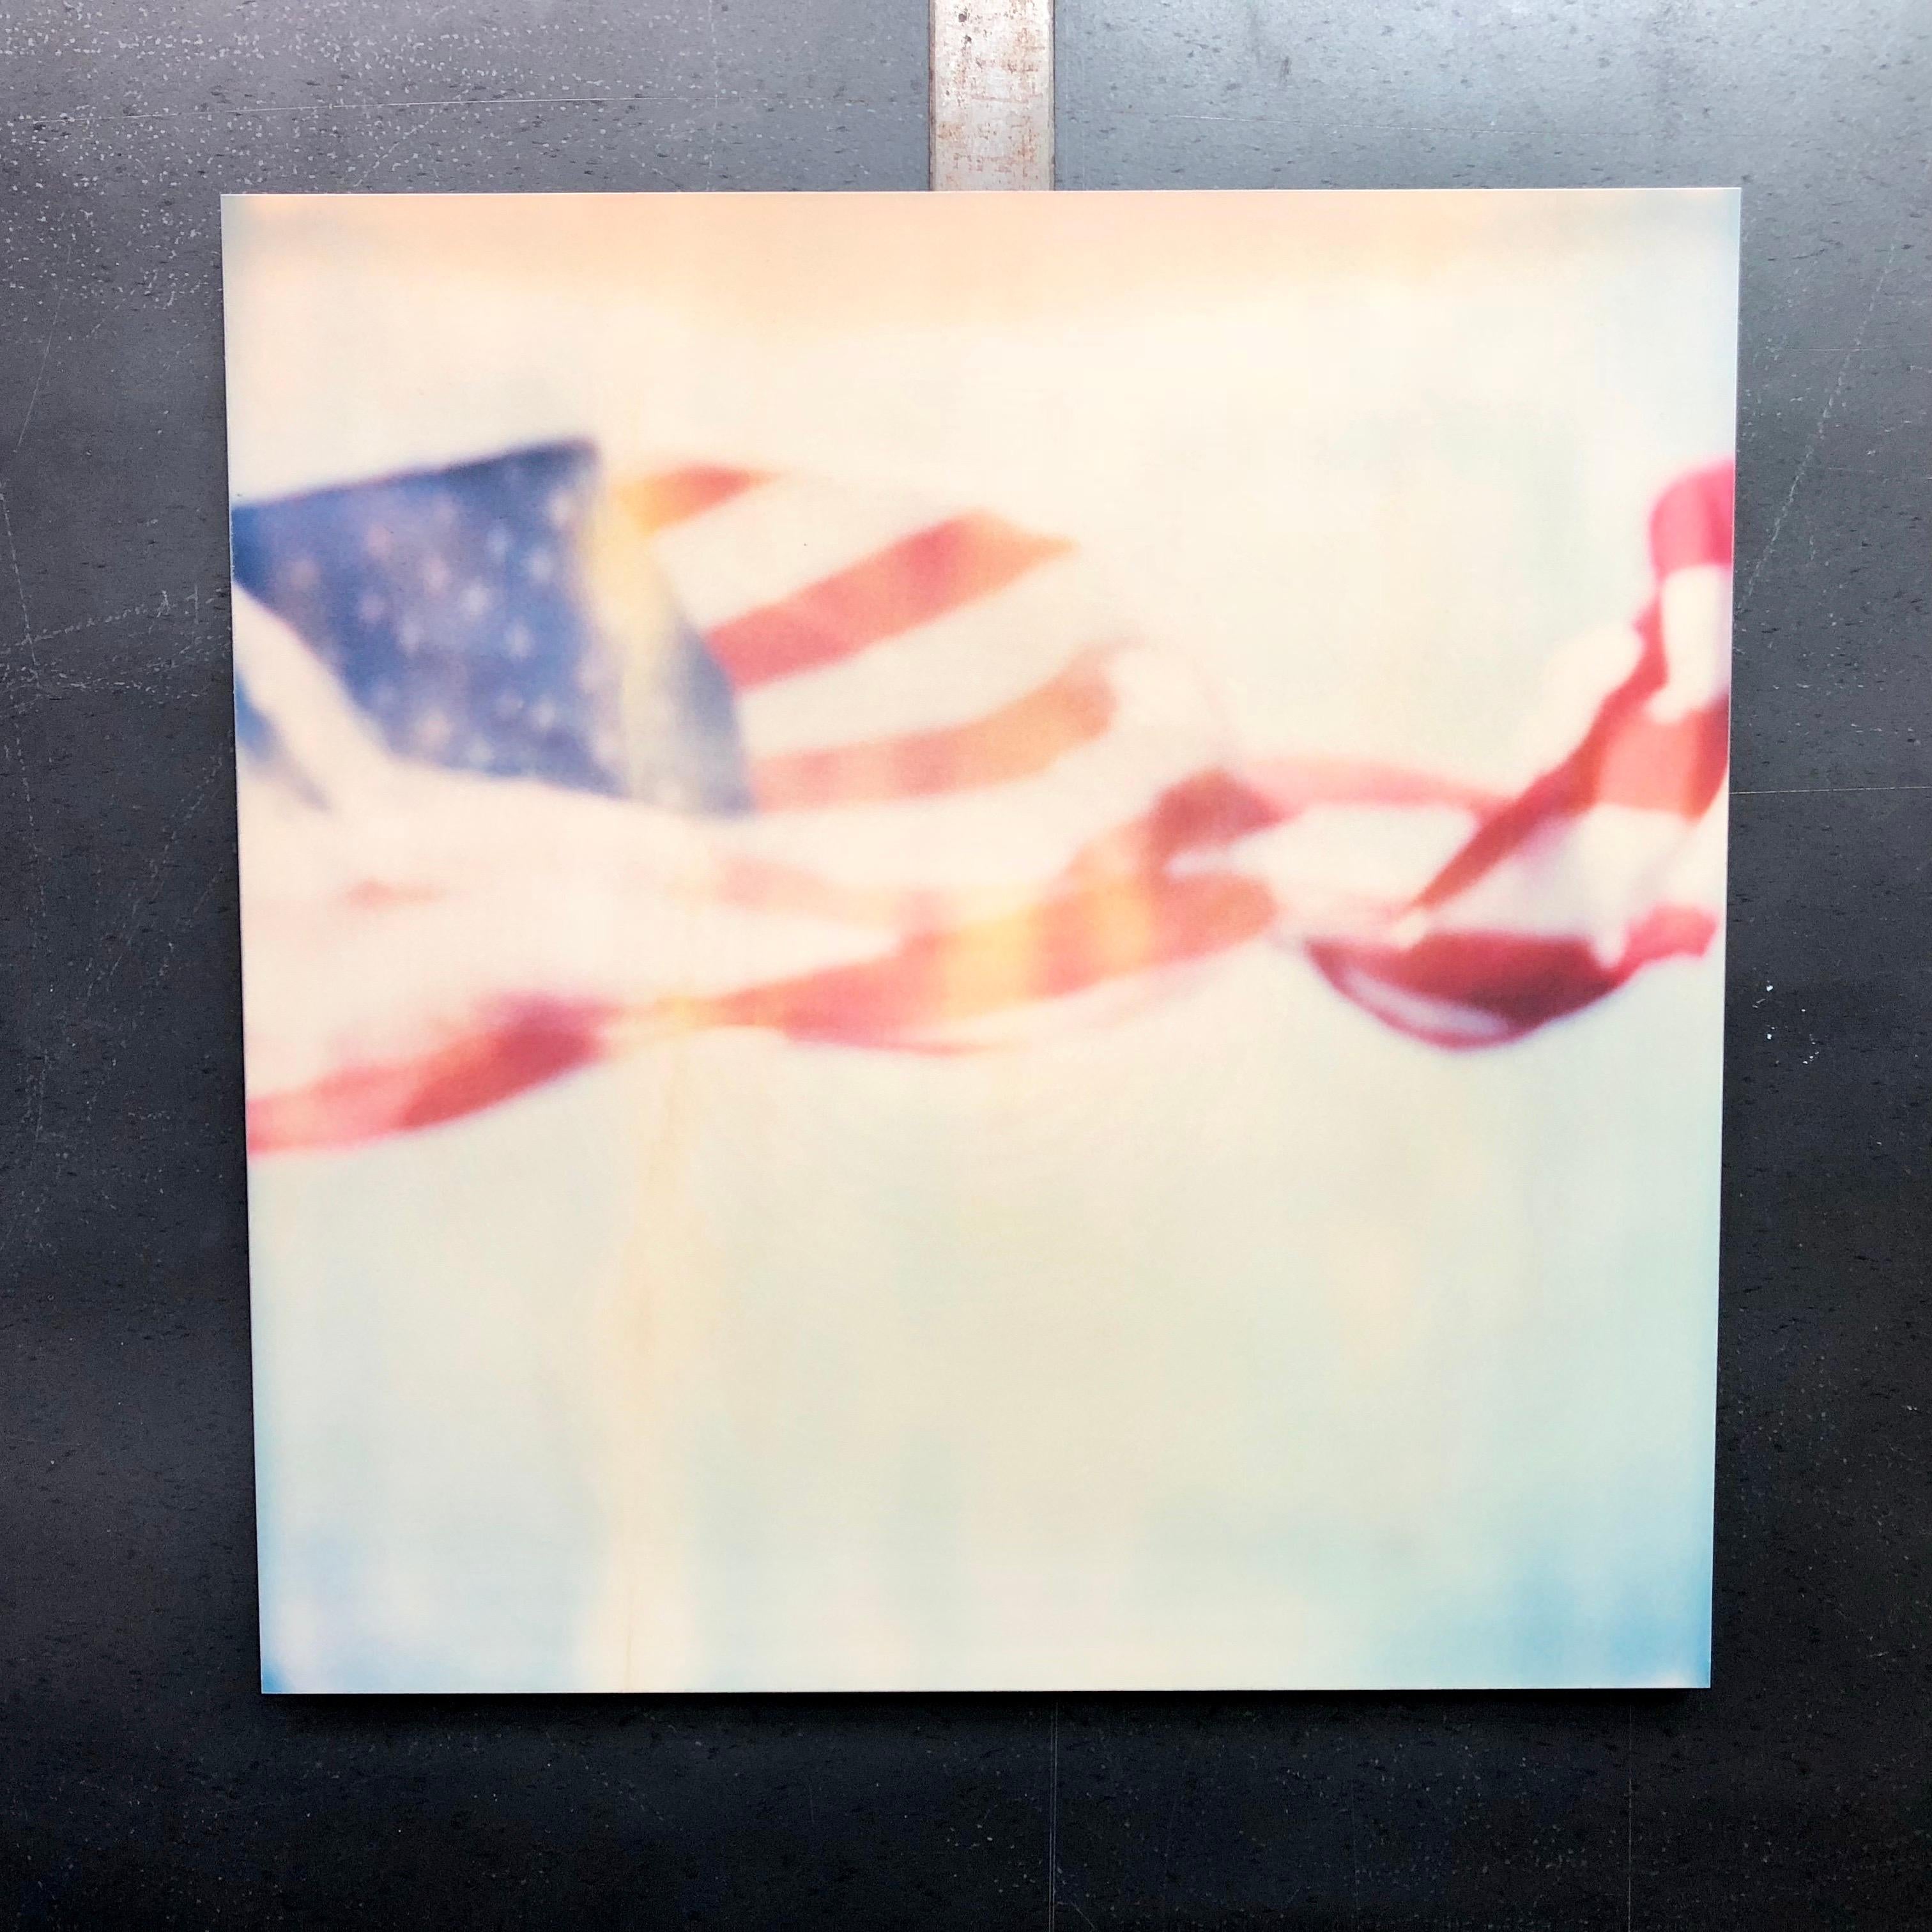 Primary Colors - Contemporary, Abstract, Landscape, USA, Polaroid, Flag 3